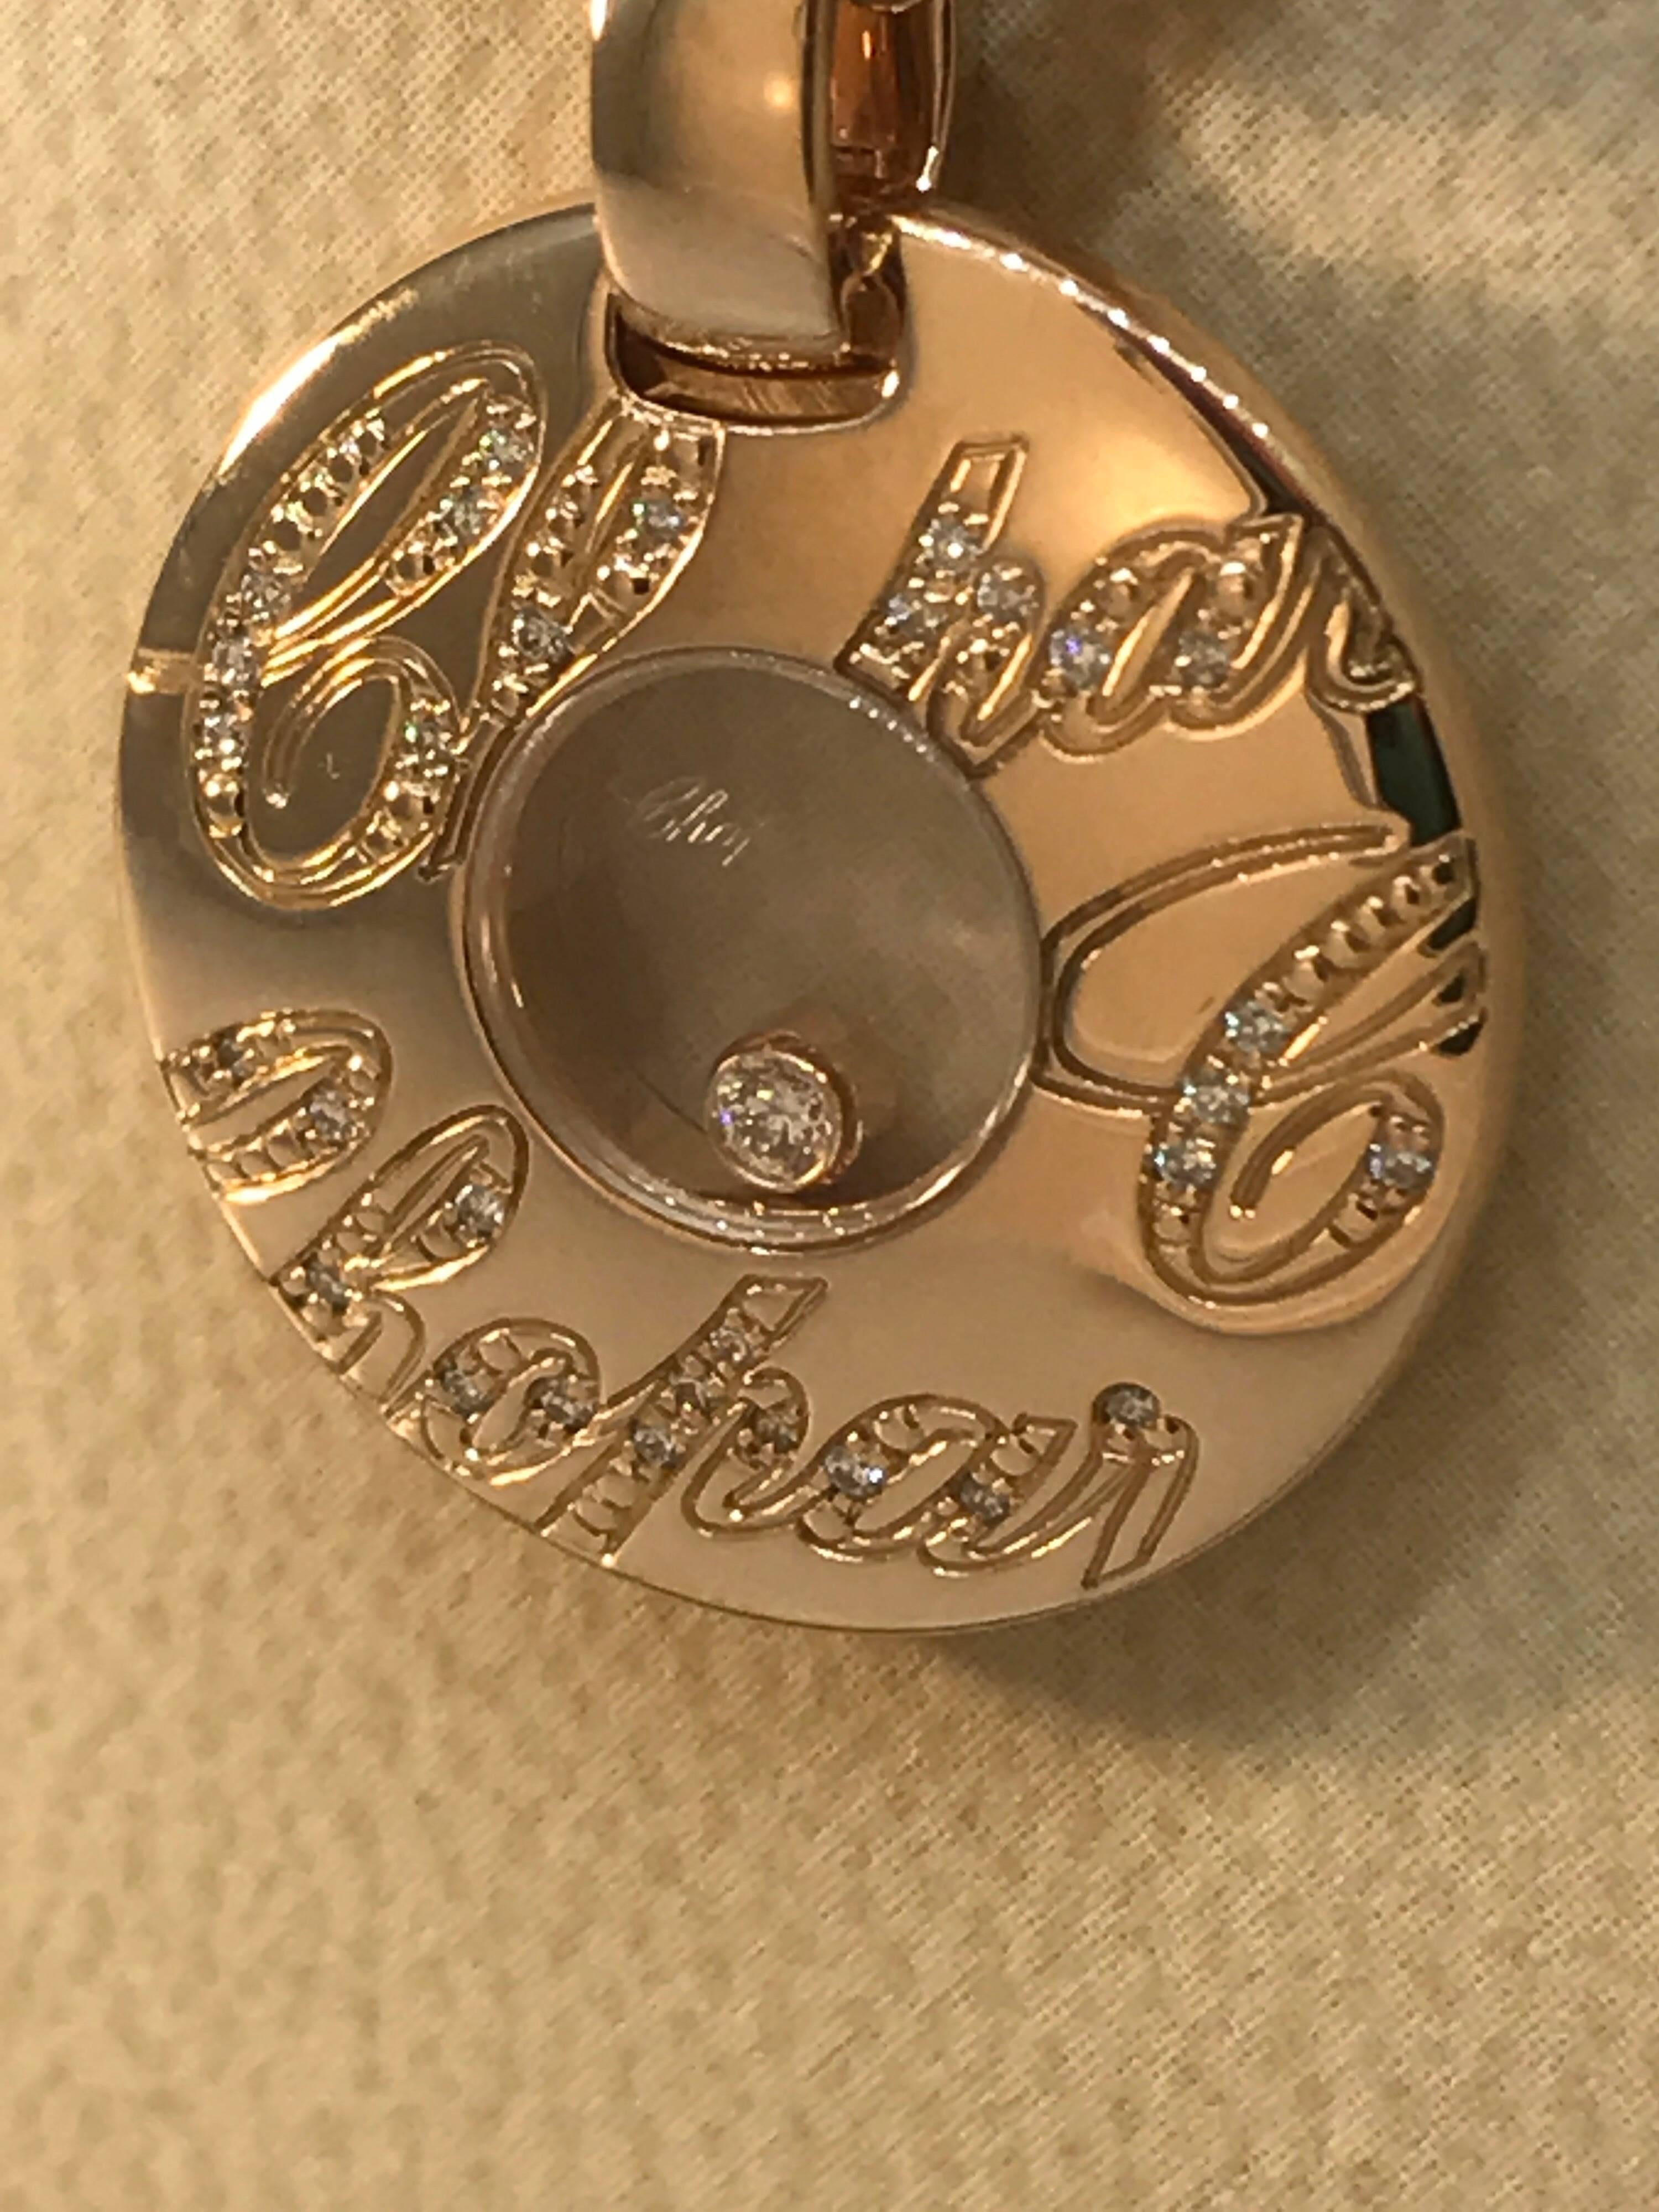 Chopard Chopardissimo Pendant / Necklace

Model Number 79/7601-5001

100% Authentic

Brand New

Comes with original Chopard box, certificate of authenticity and warranty and jewels manual

18 Karat Rose Gold

30 Diamonds on the Pendant (.06